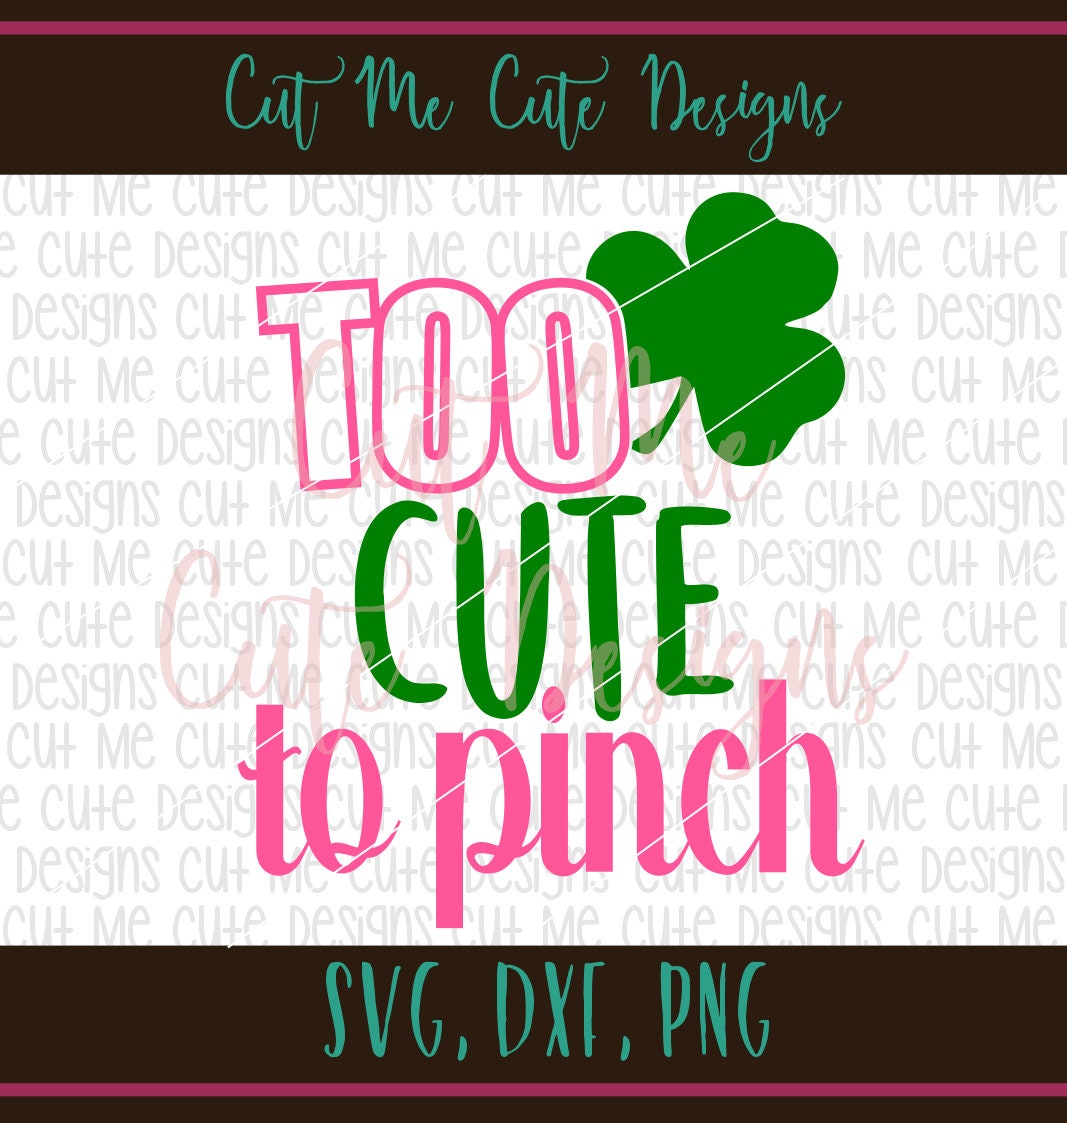 Download SVG DXF PNG cut file cricut silhouette cameo scrap booking Too